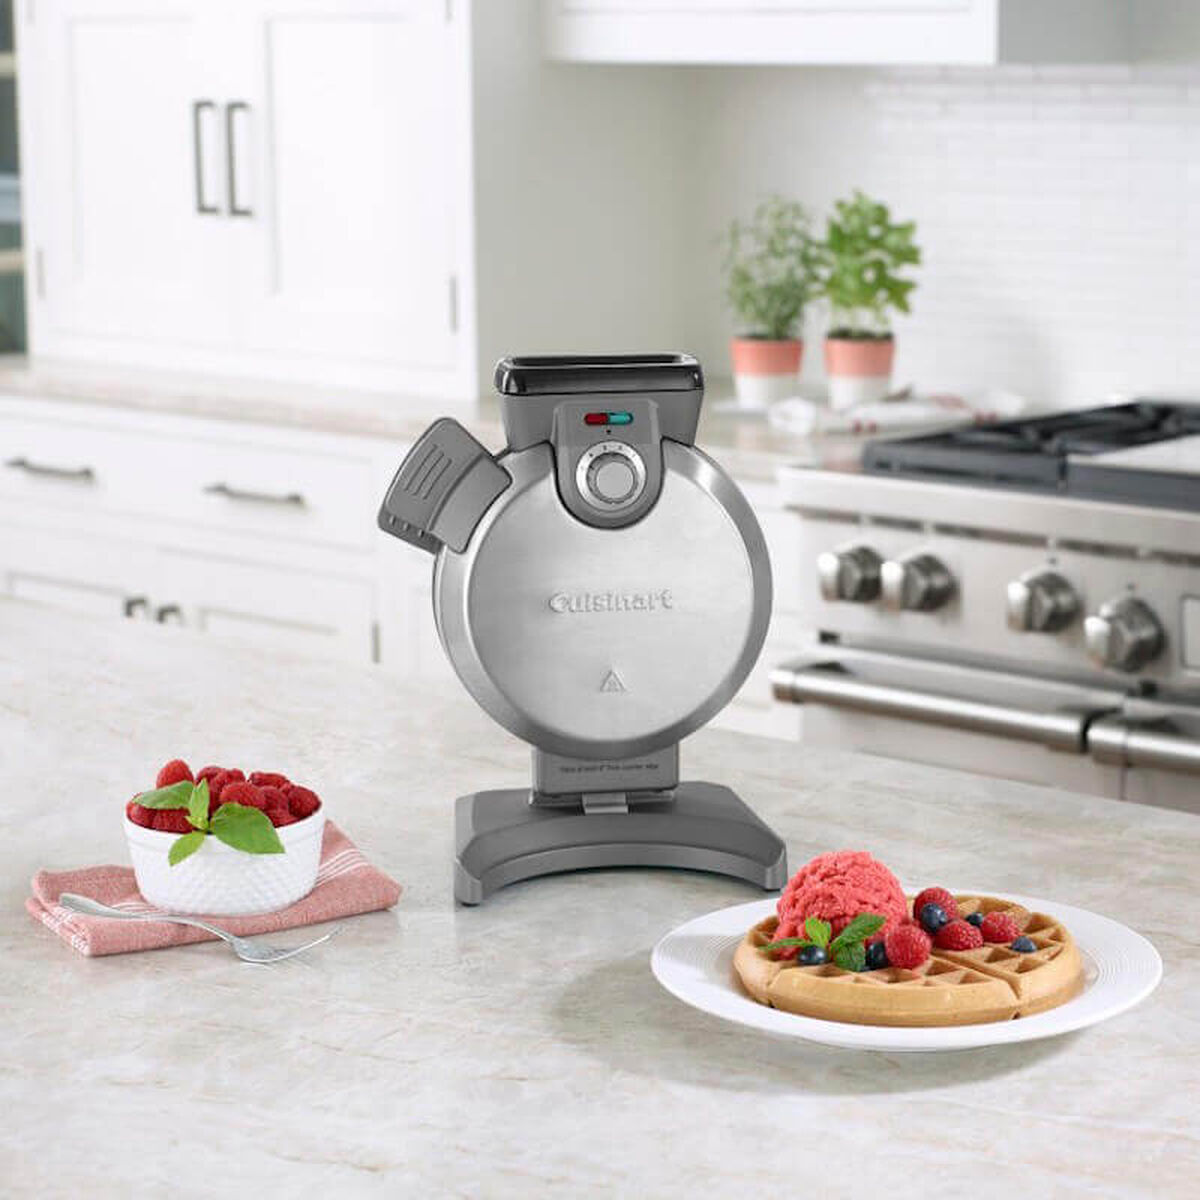 Discontinued Vertical Waffle Maker